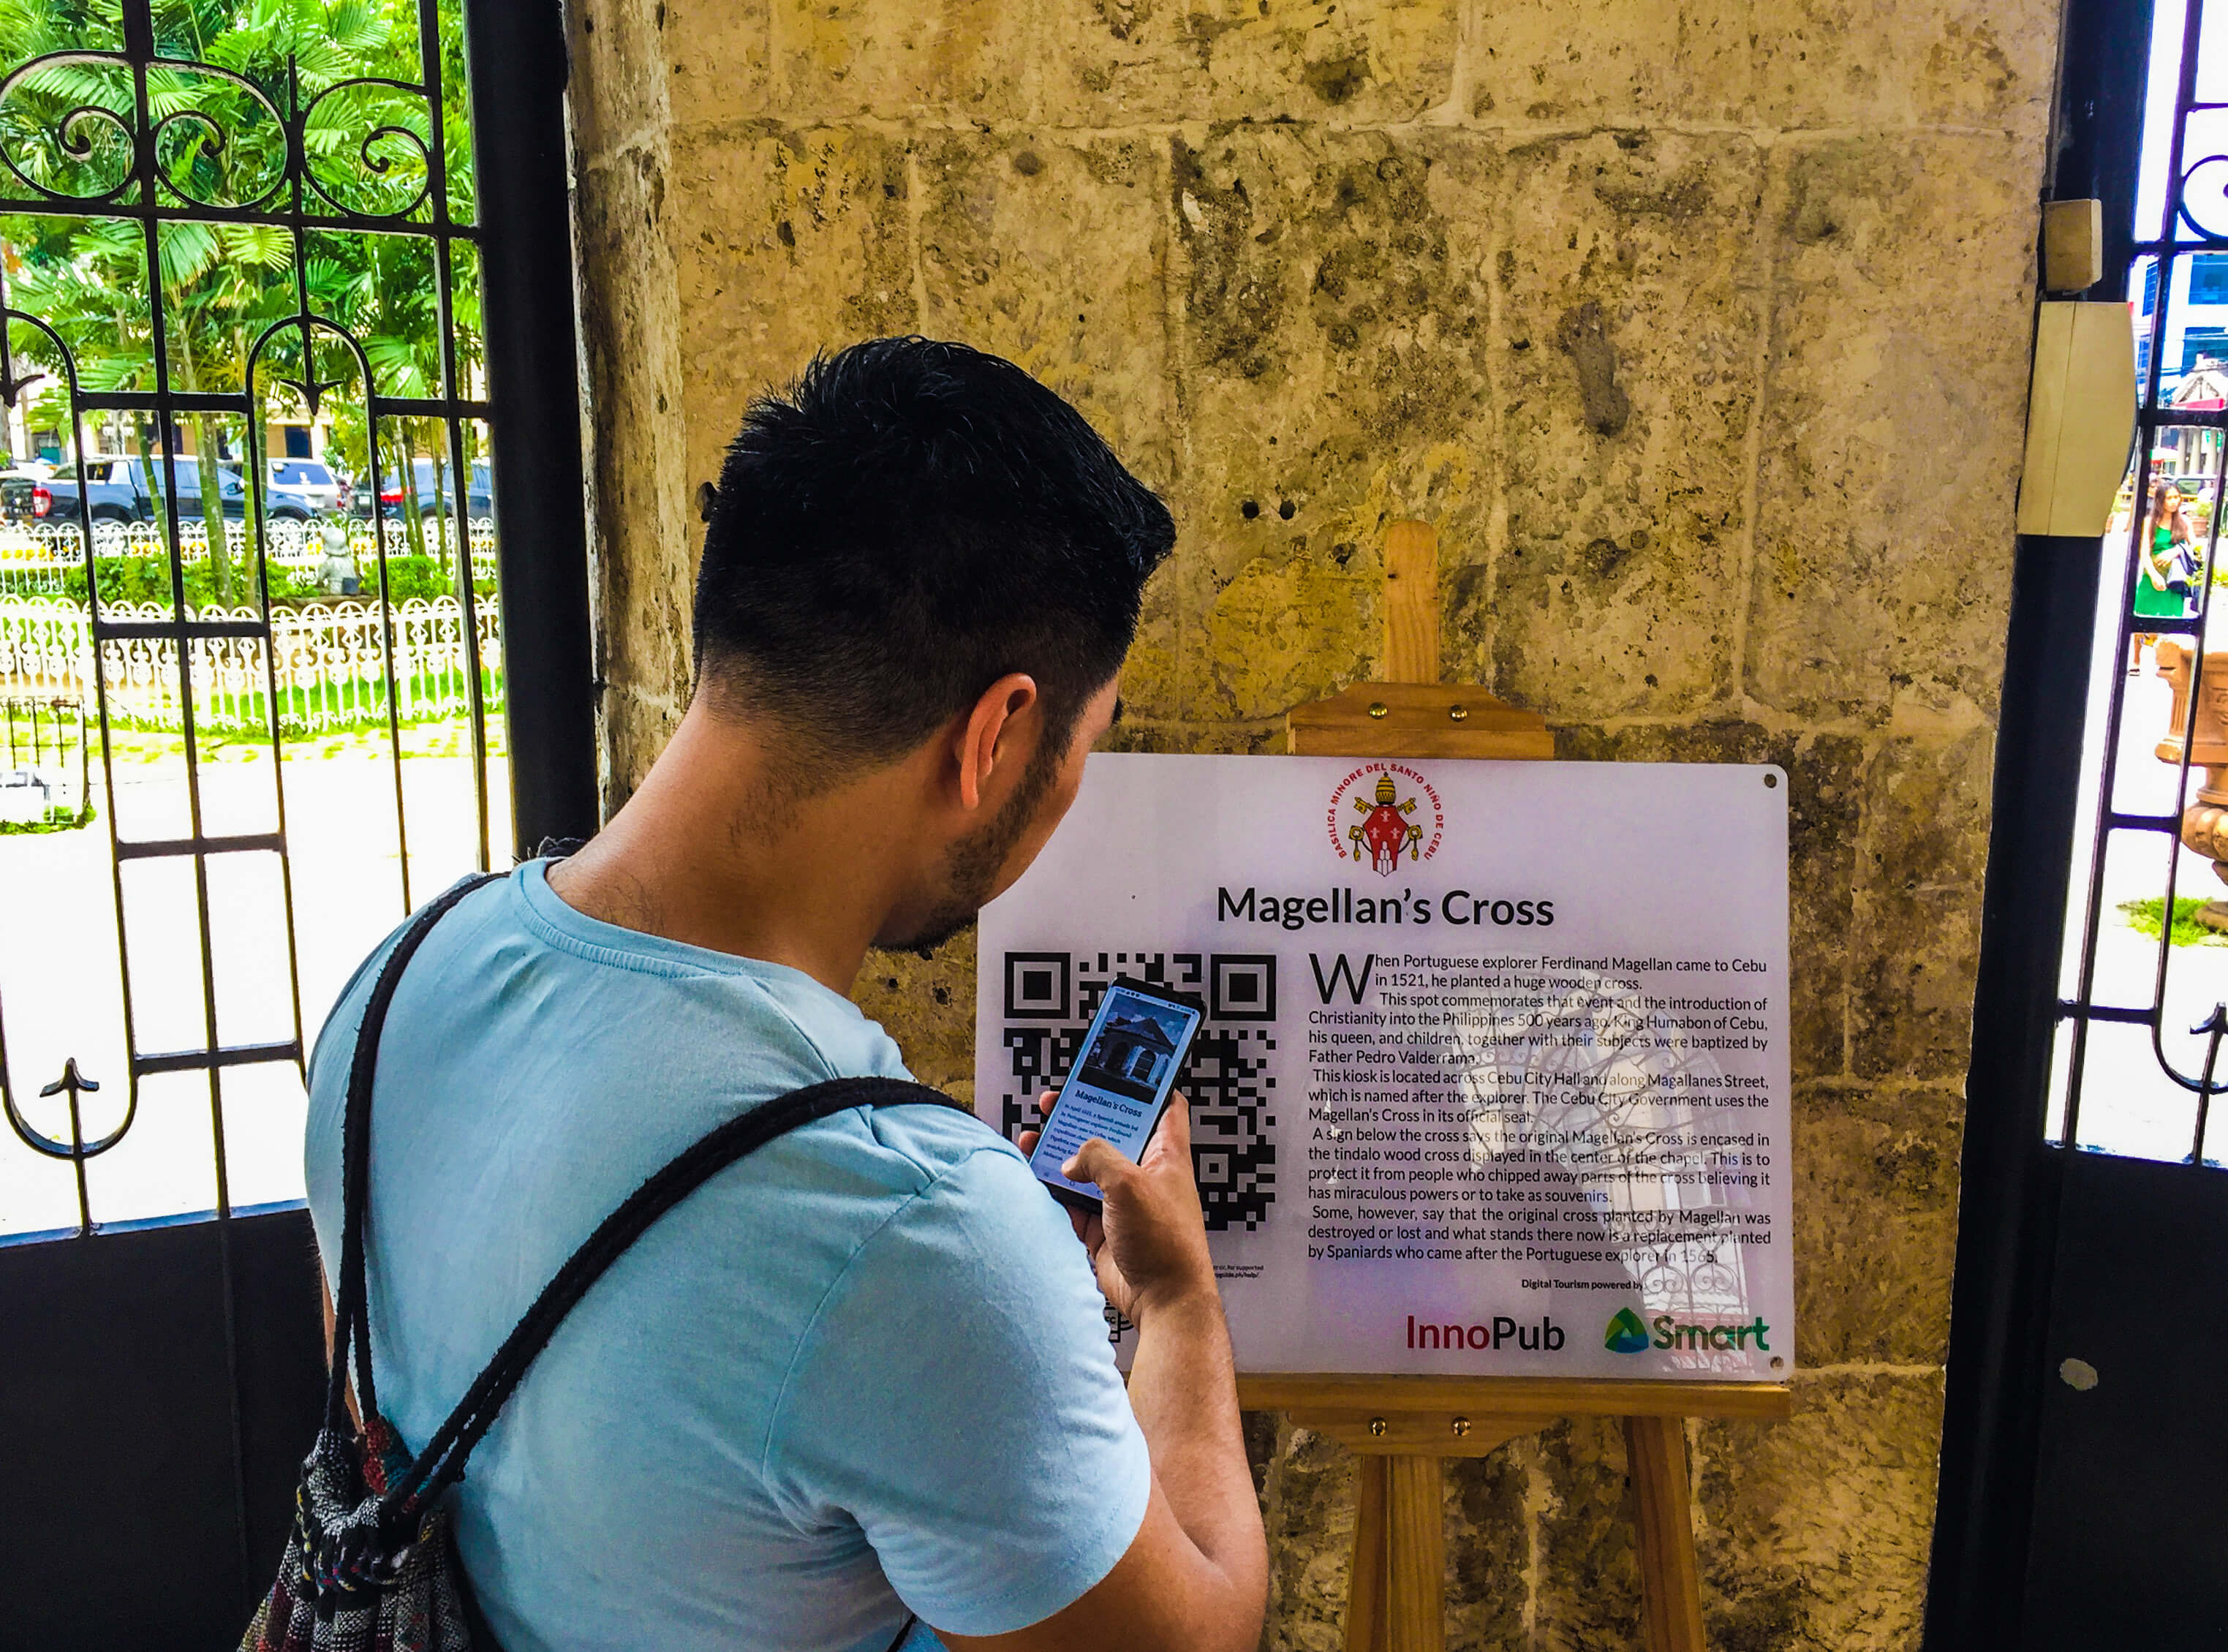 MAGELLAN’S CROSS. A visitor reads about the history of the Magellan’s Cross and views archival photos of the kiosk after scanning the interactive Digital Tourism marker placed there.